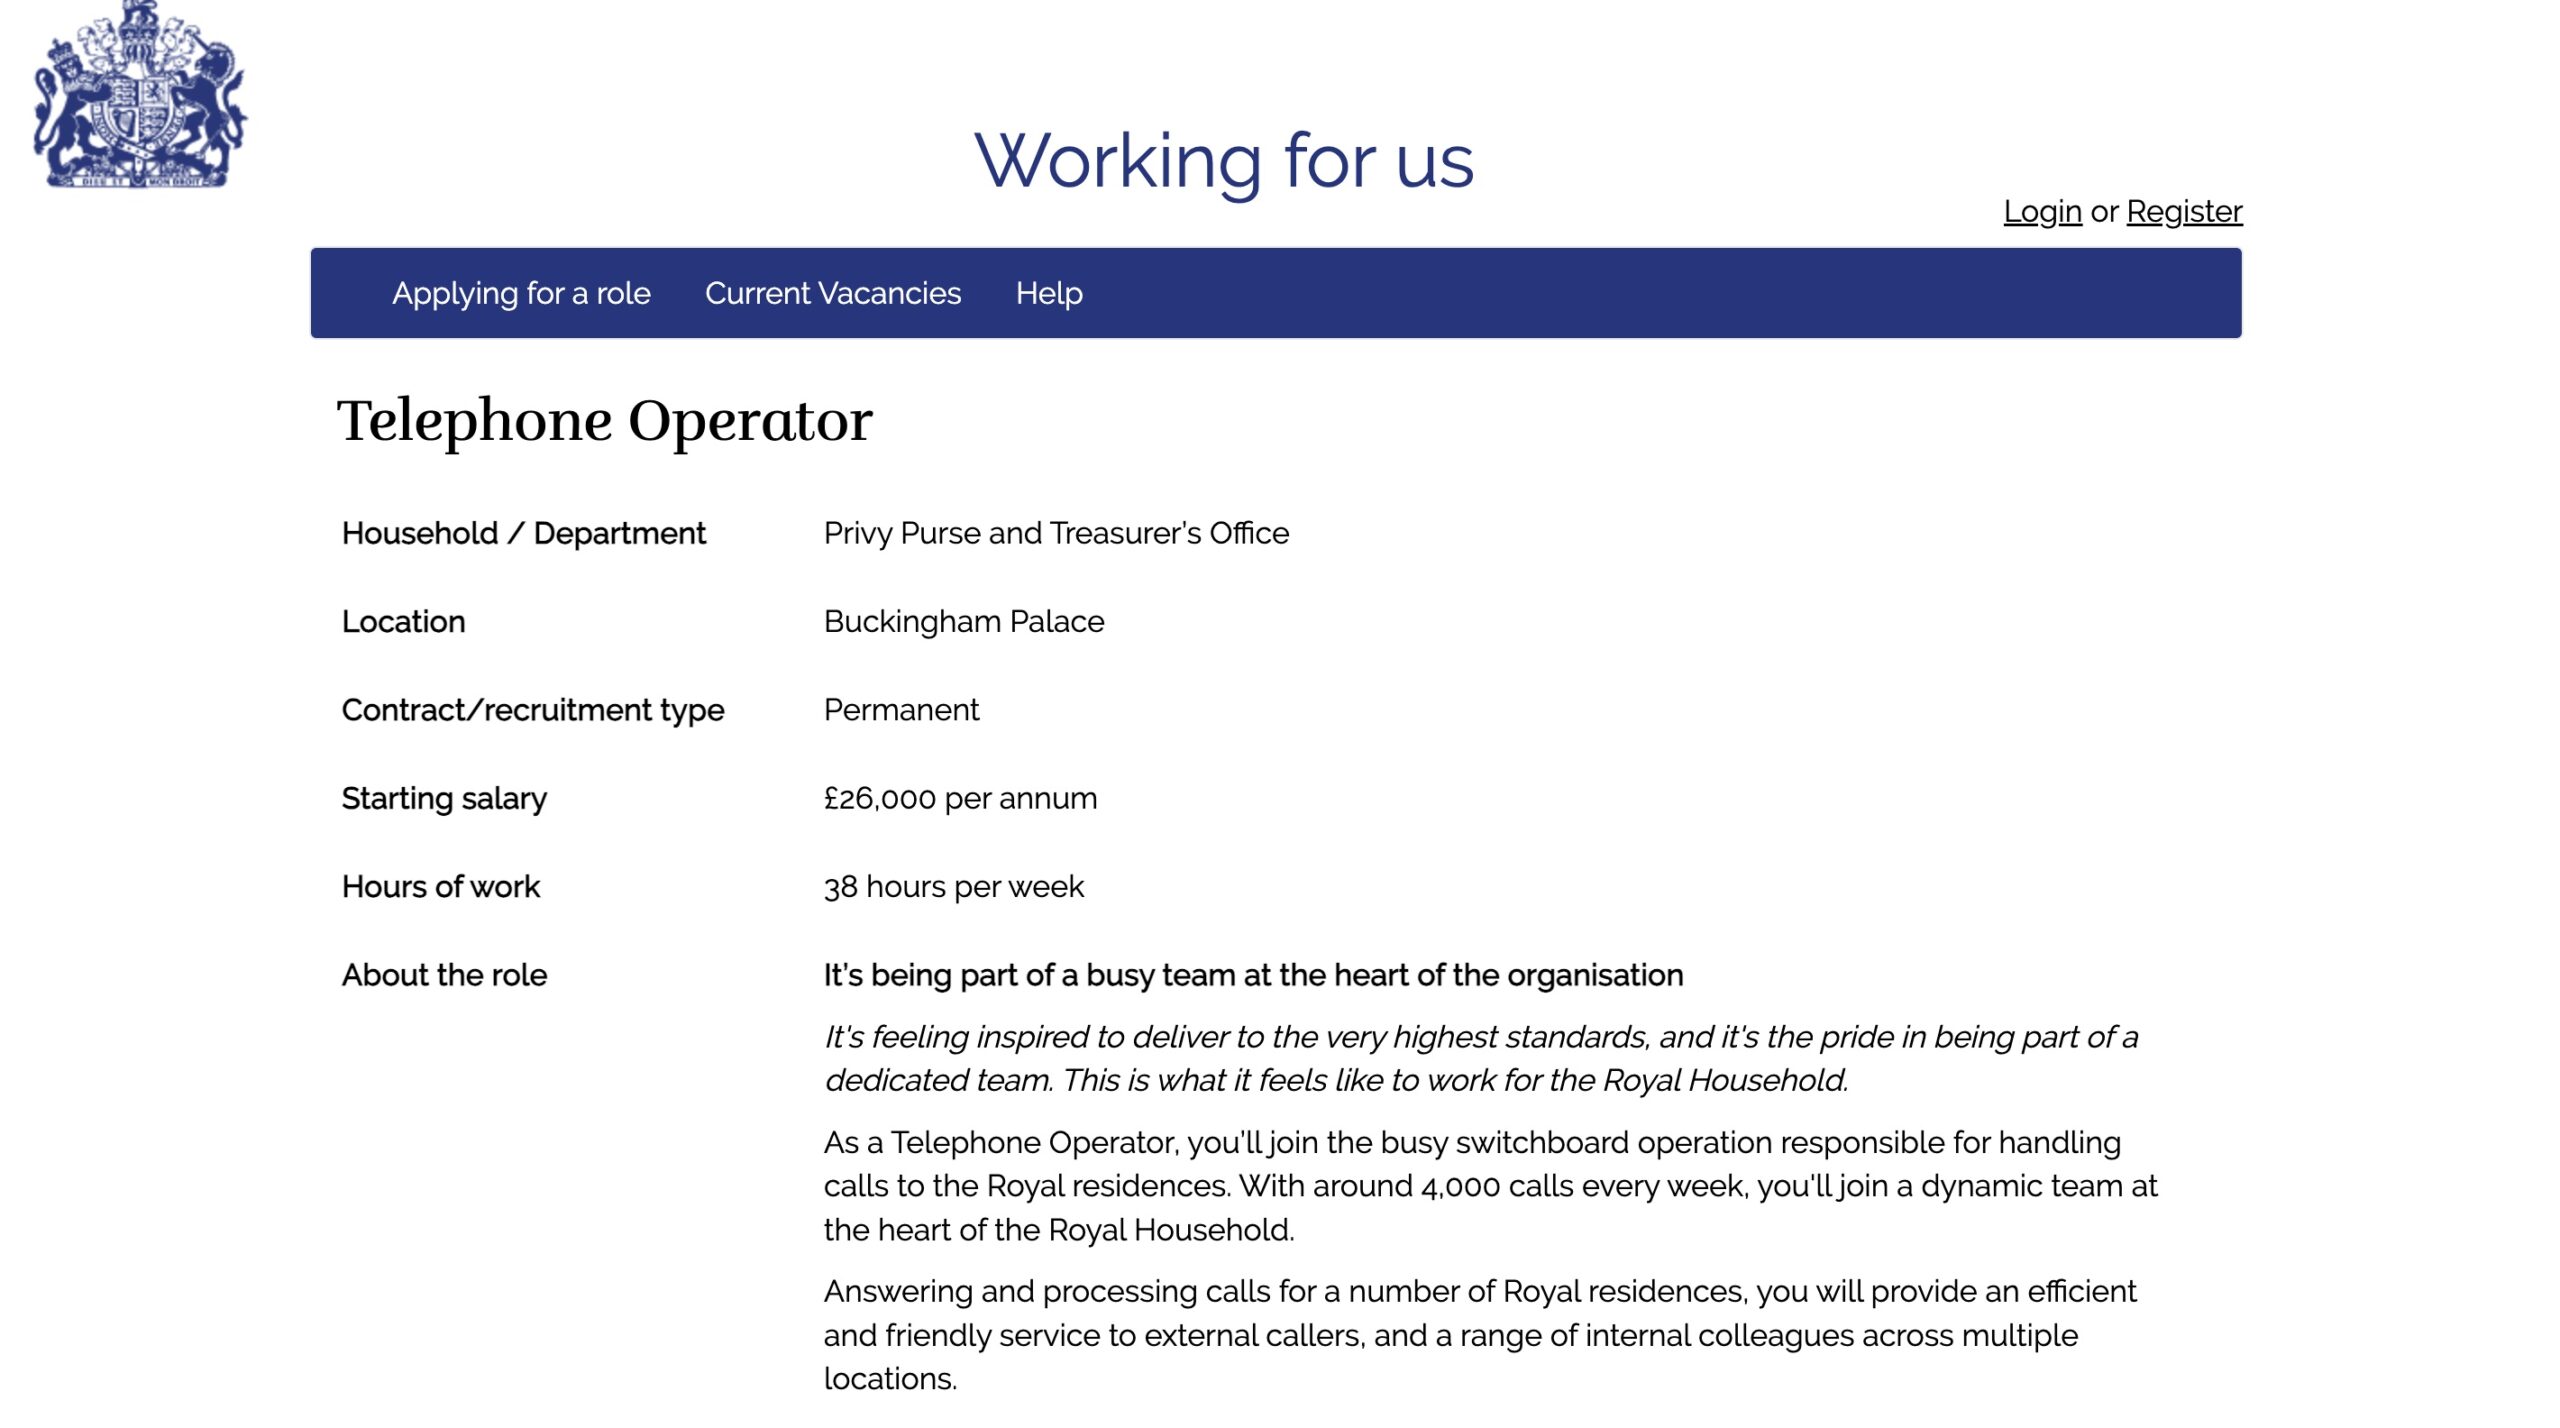 The job description and application for a royal phone operator.